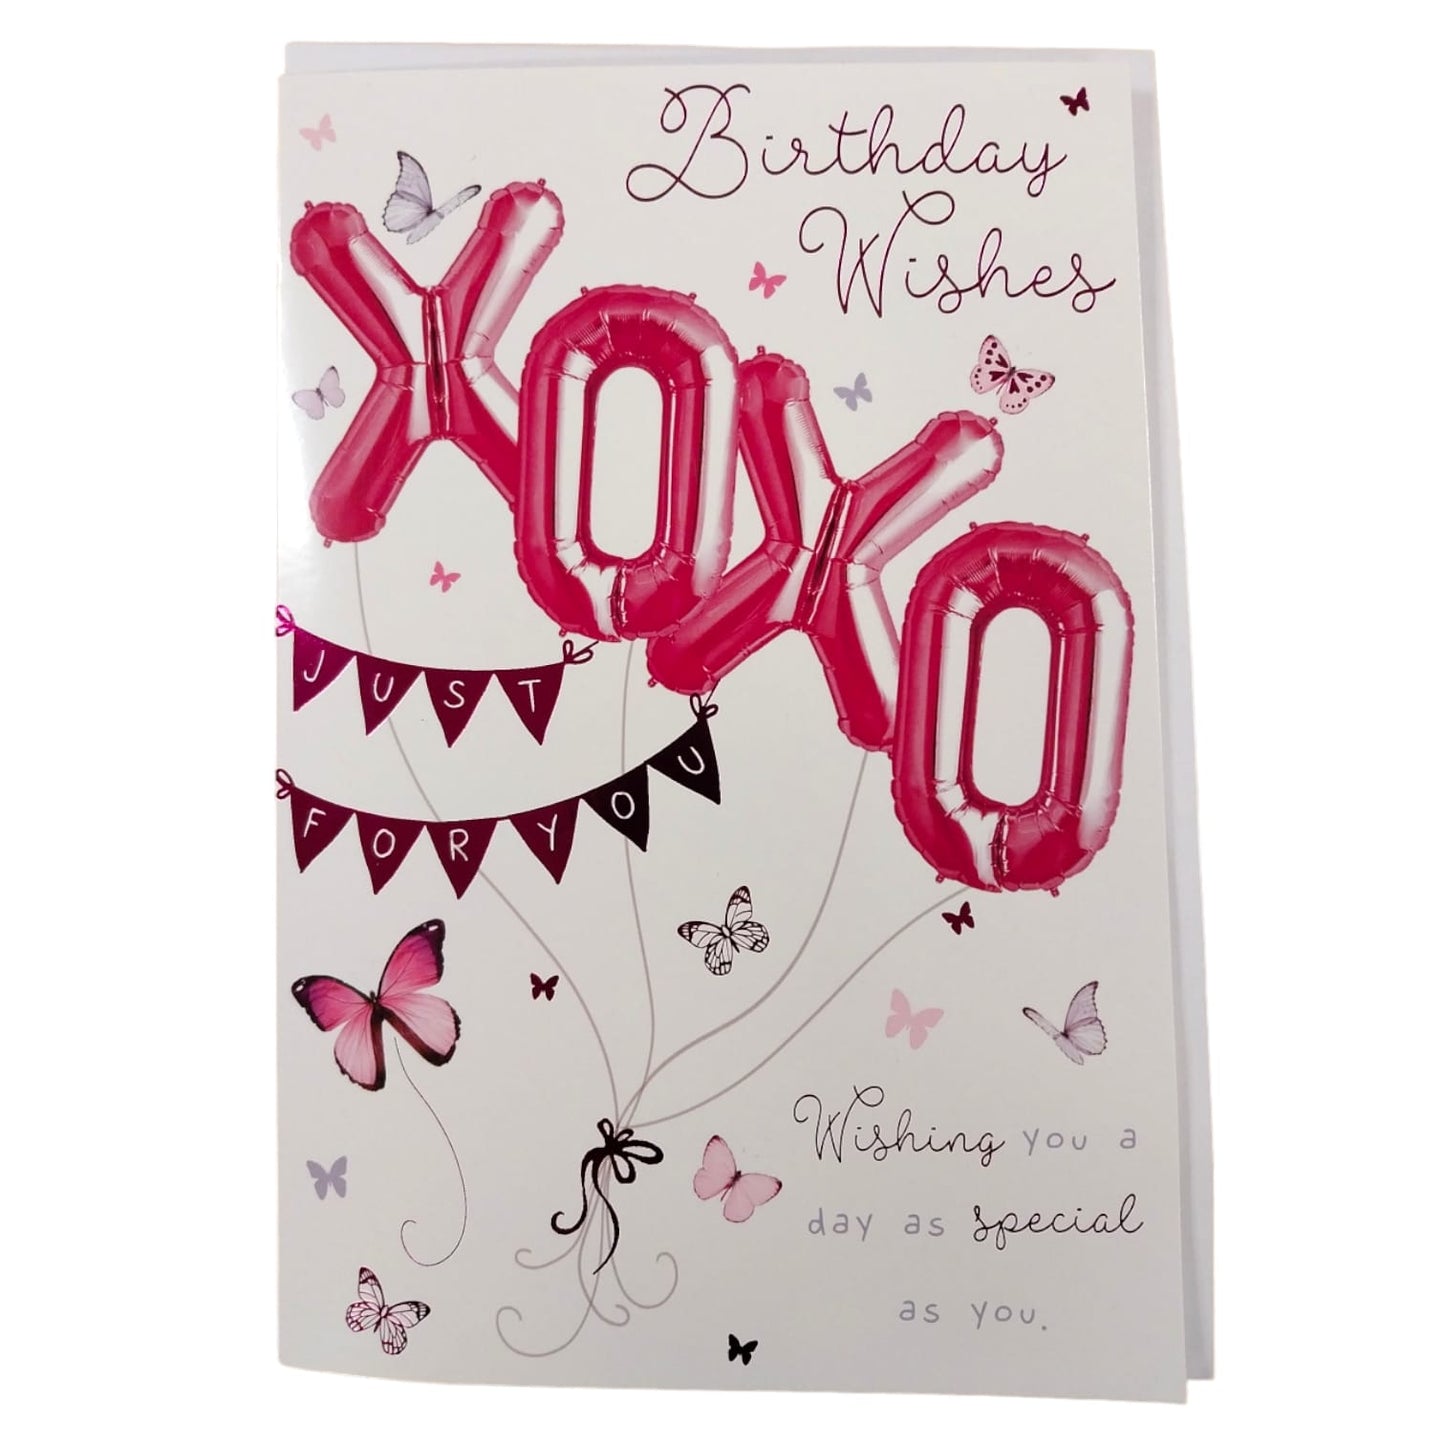 Birthday Wishes Balloon Boutique Greeting Card